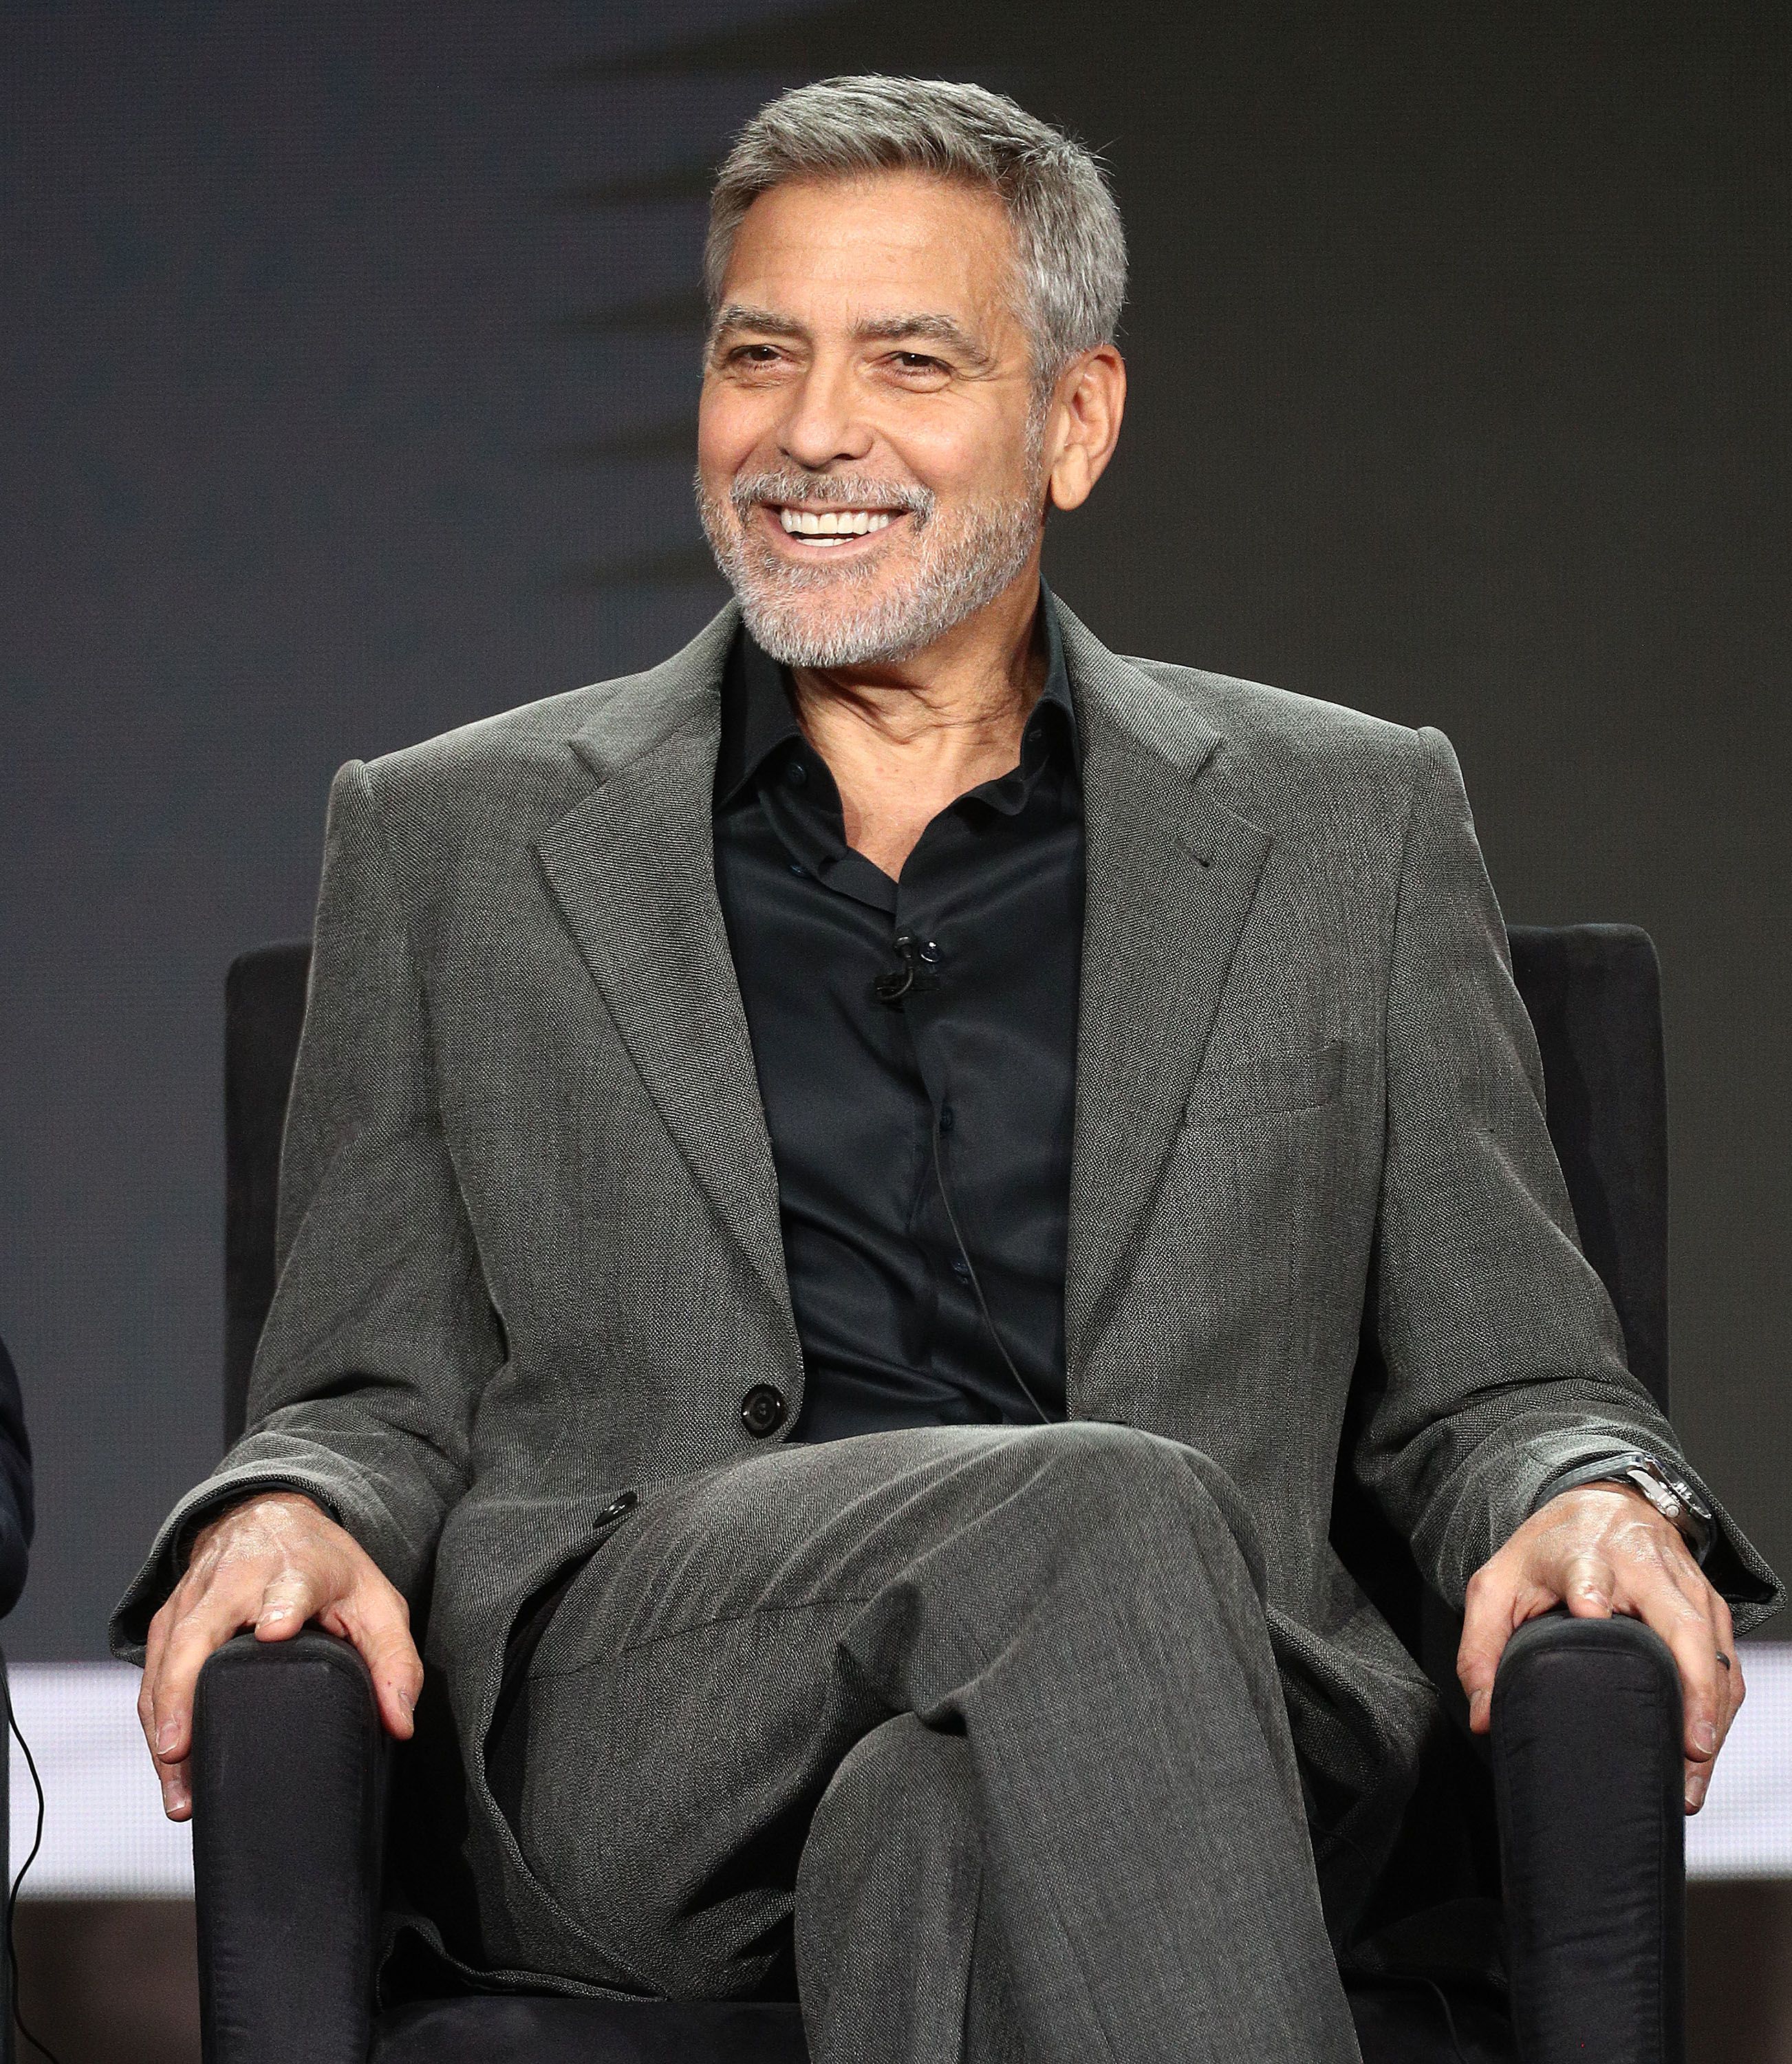 George Clooney at the Hulu segment of the 2019 Winter Television Critics Association Press Tour at The Langham Huntington, Pasadena on February 11, 2019 | Photo: Getty Images